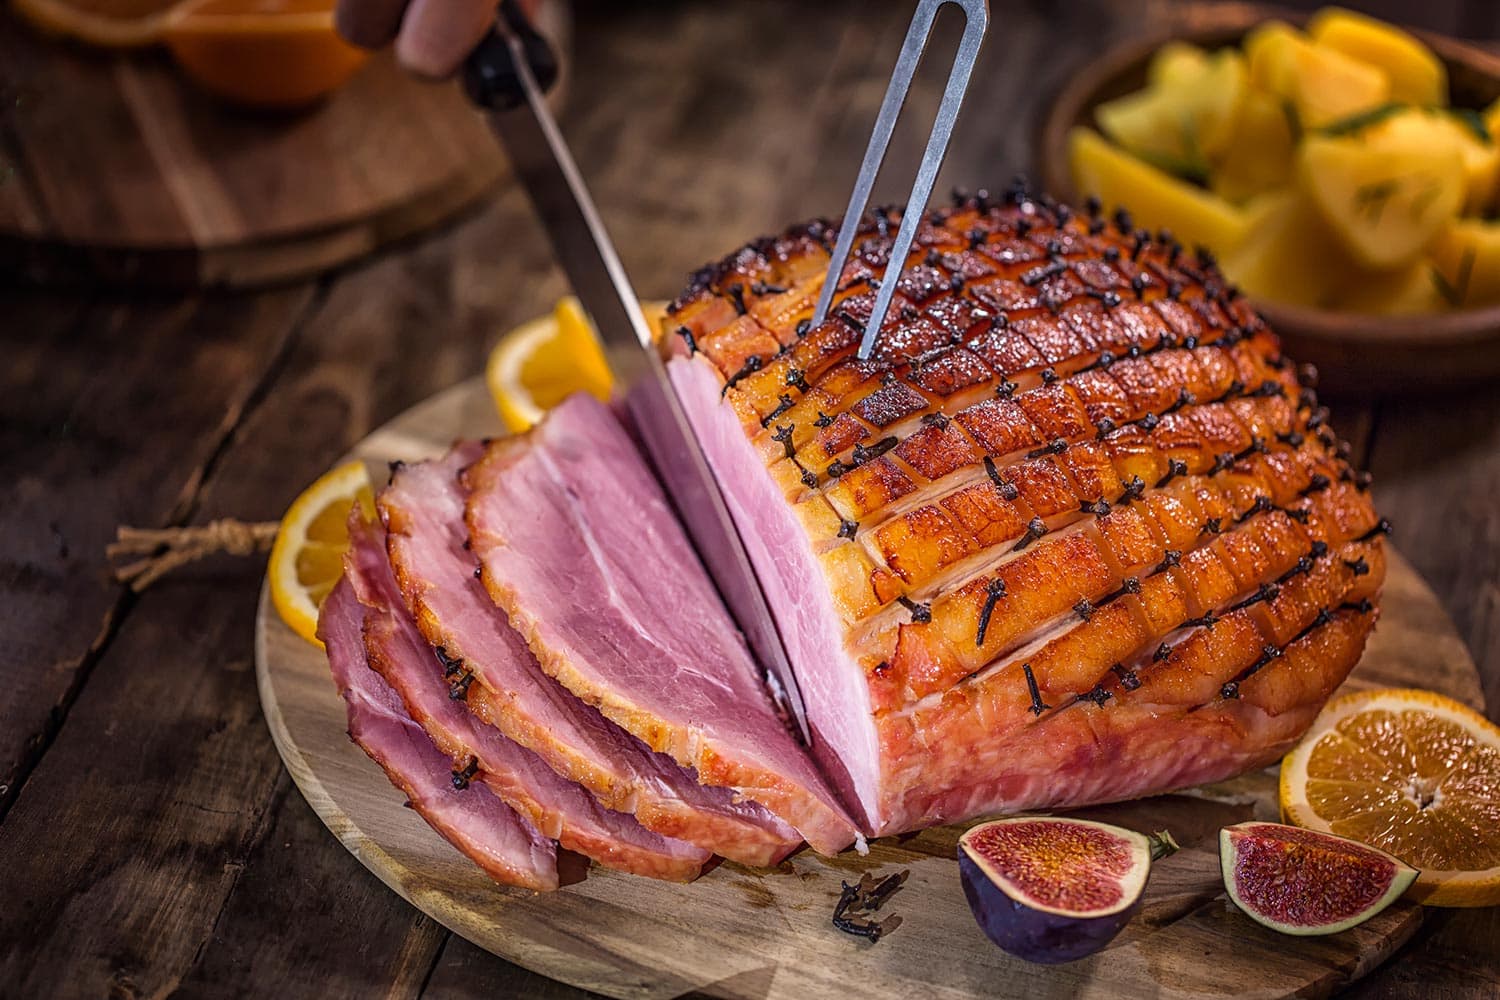 Carving glazed holiday ham with cloves